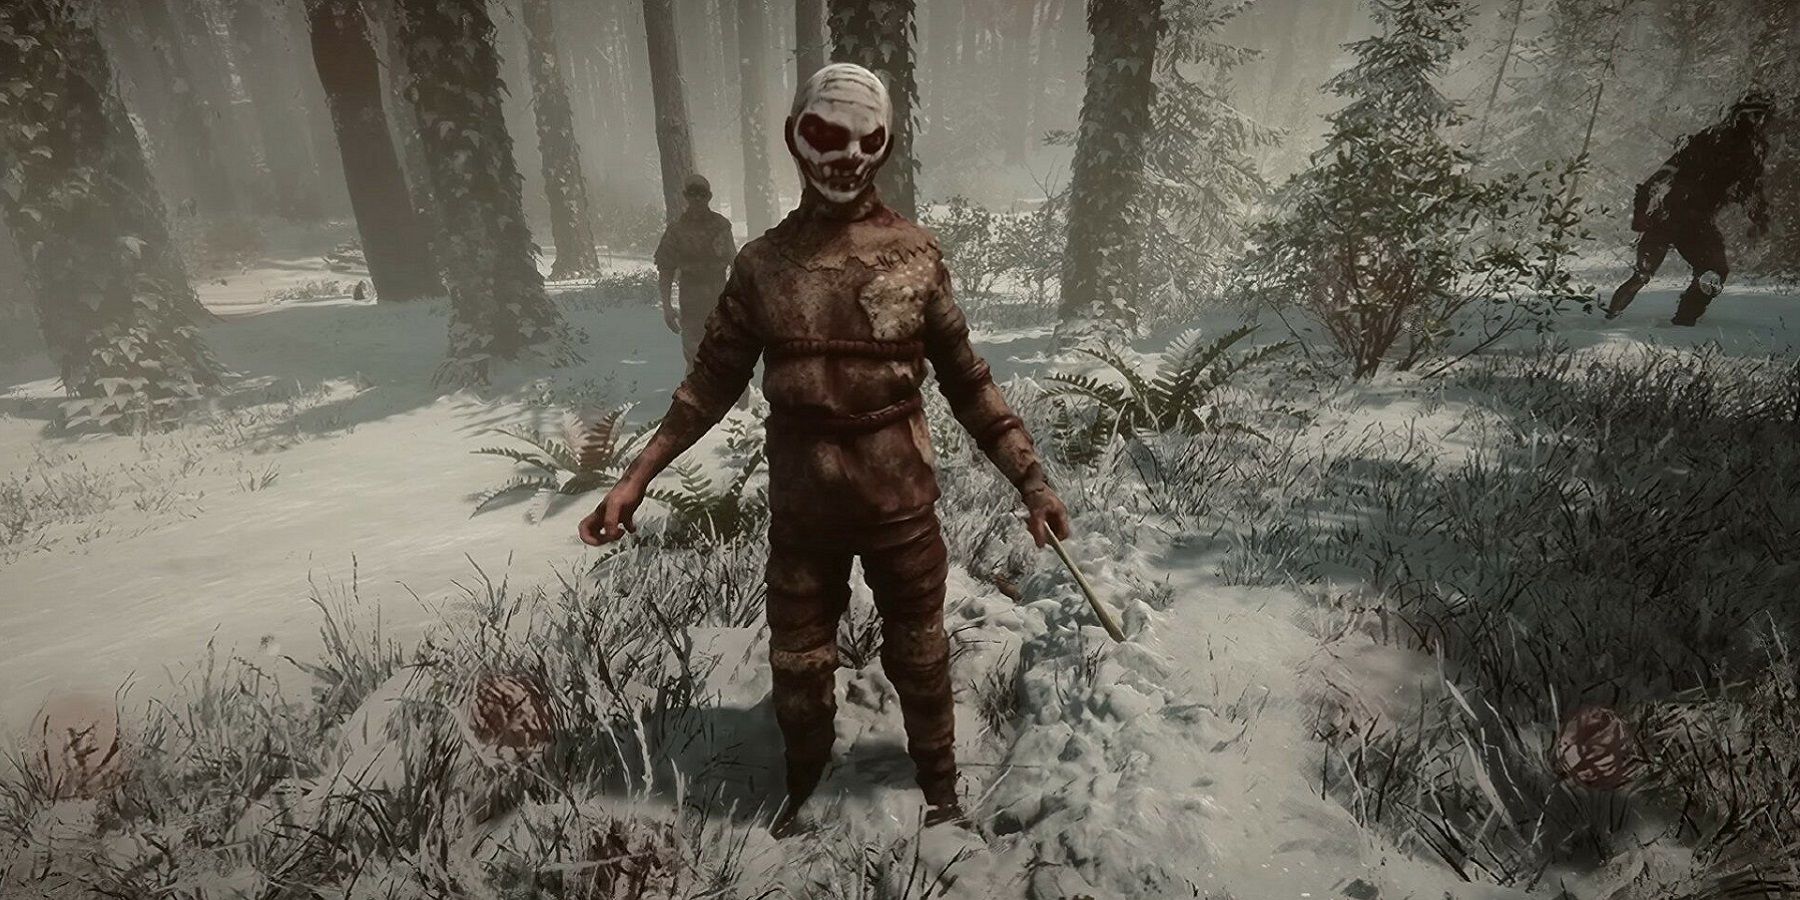 Image from Sons of the Forest showing a cannibal stood in the middle of the snowy titular forest.